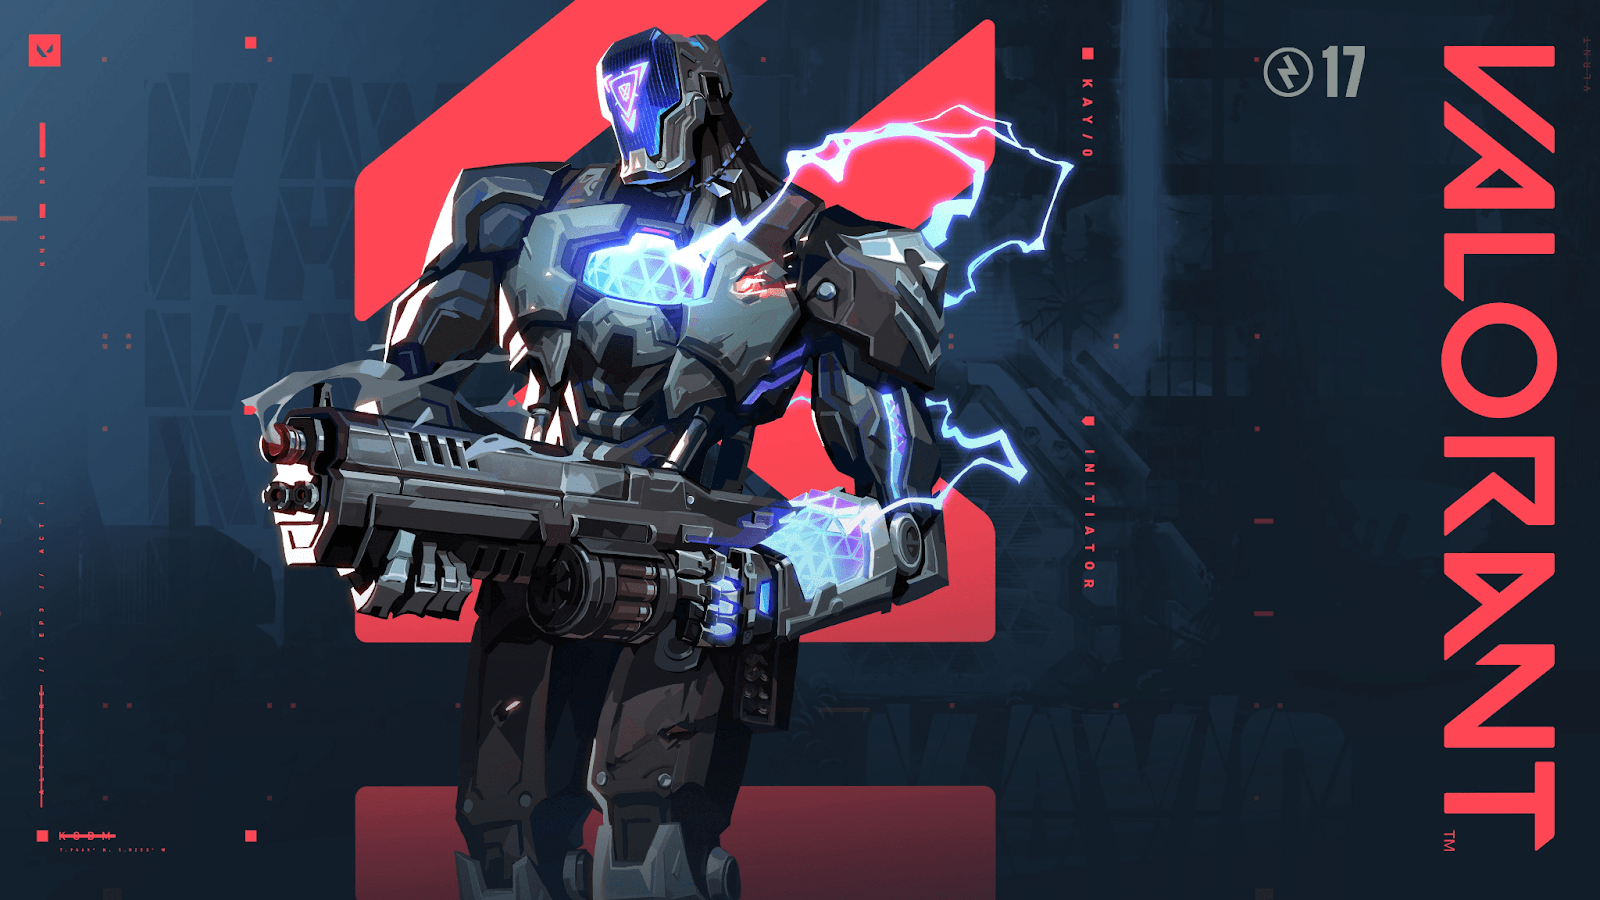 KAY/O agent VALORANT. KAY/O is a buff-looking robot, and he stands in front of a blue and red background with the game's title on one side of the screen